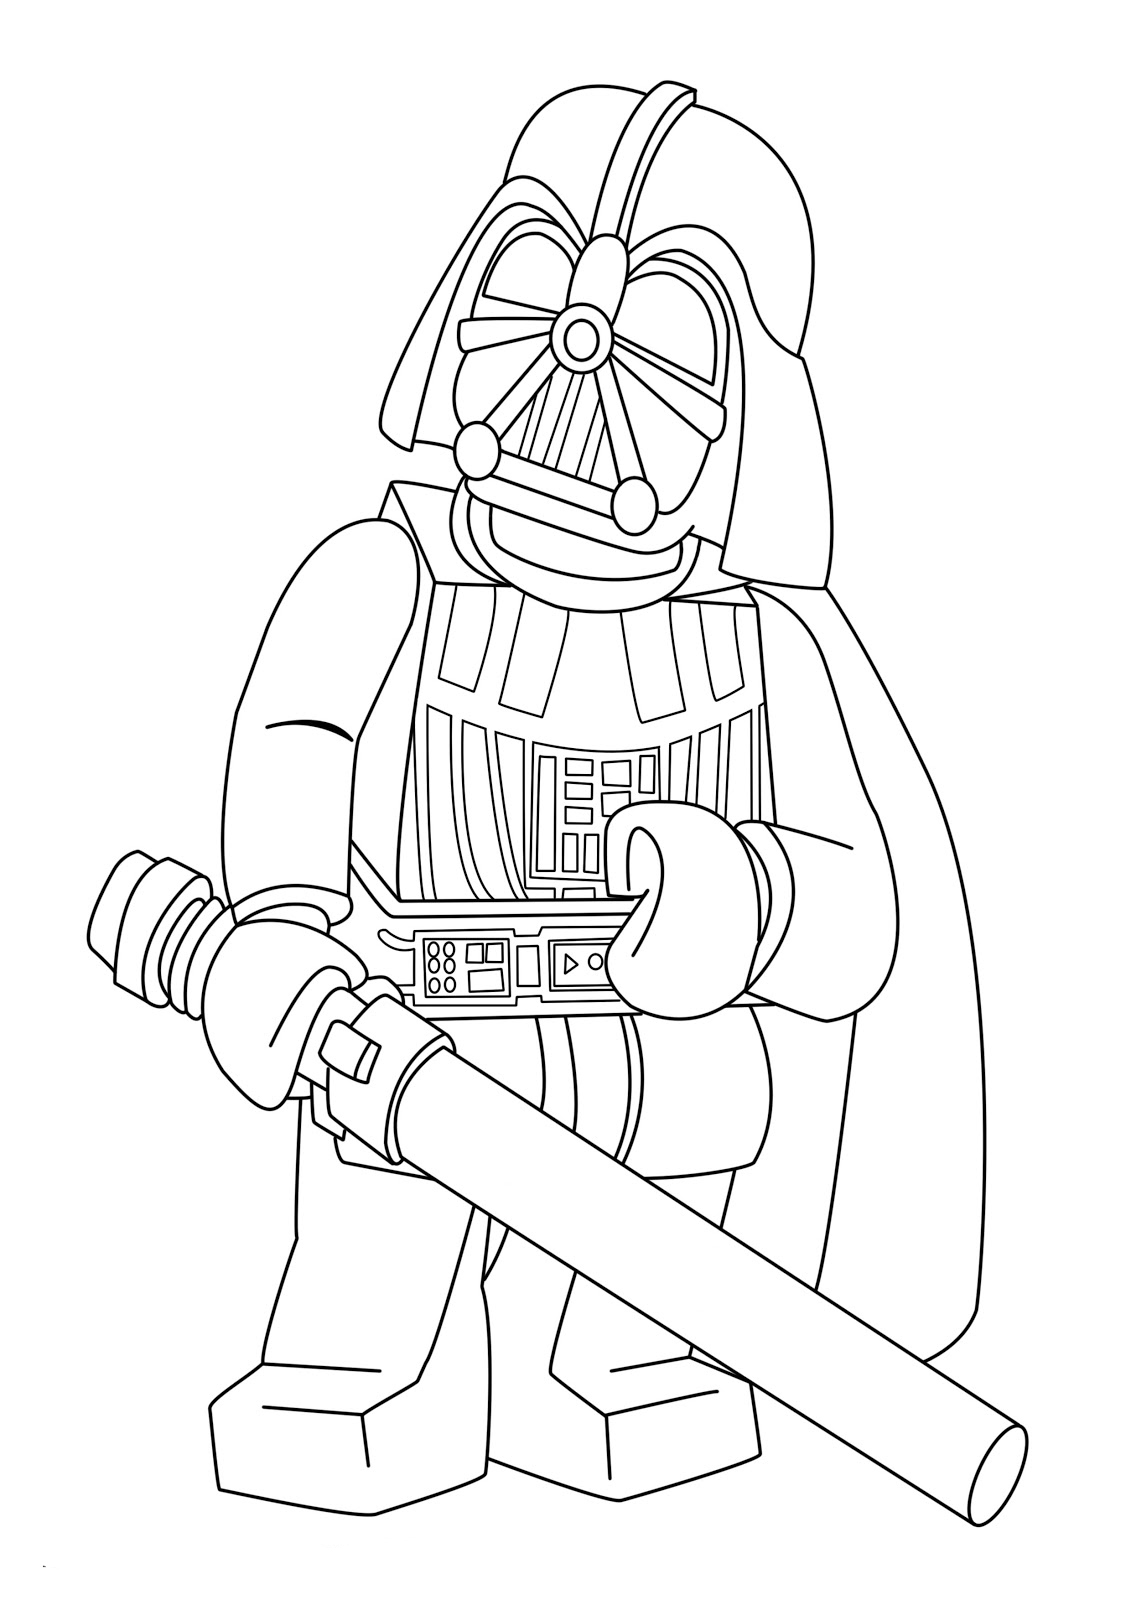 Lego Star Wars Coloring Pages   Best Coloring Pages For Kids